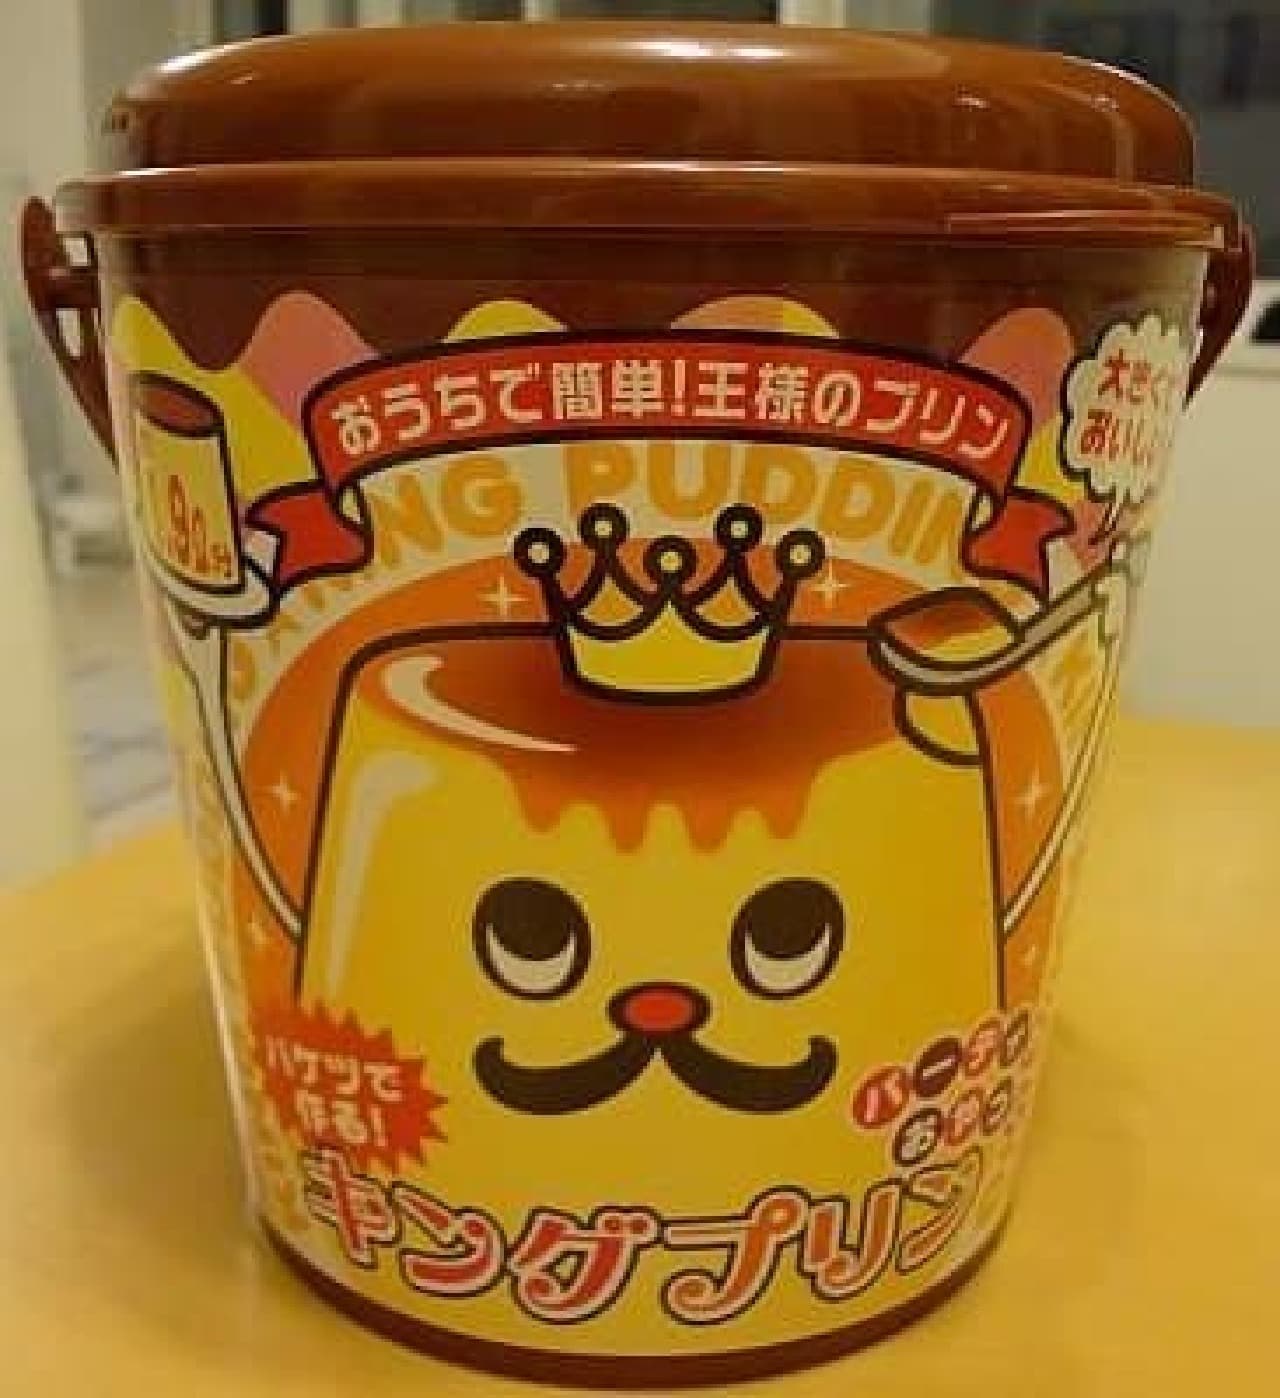 "King pudding" Realizes the dream "pudding with a bucket"